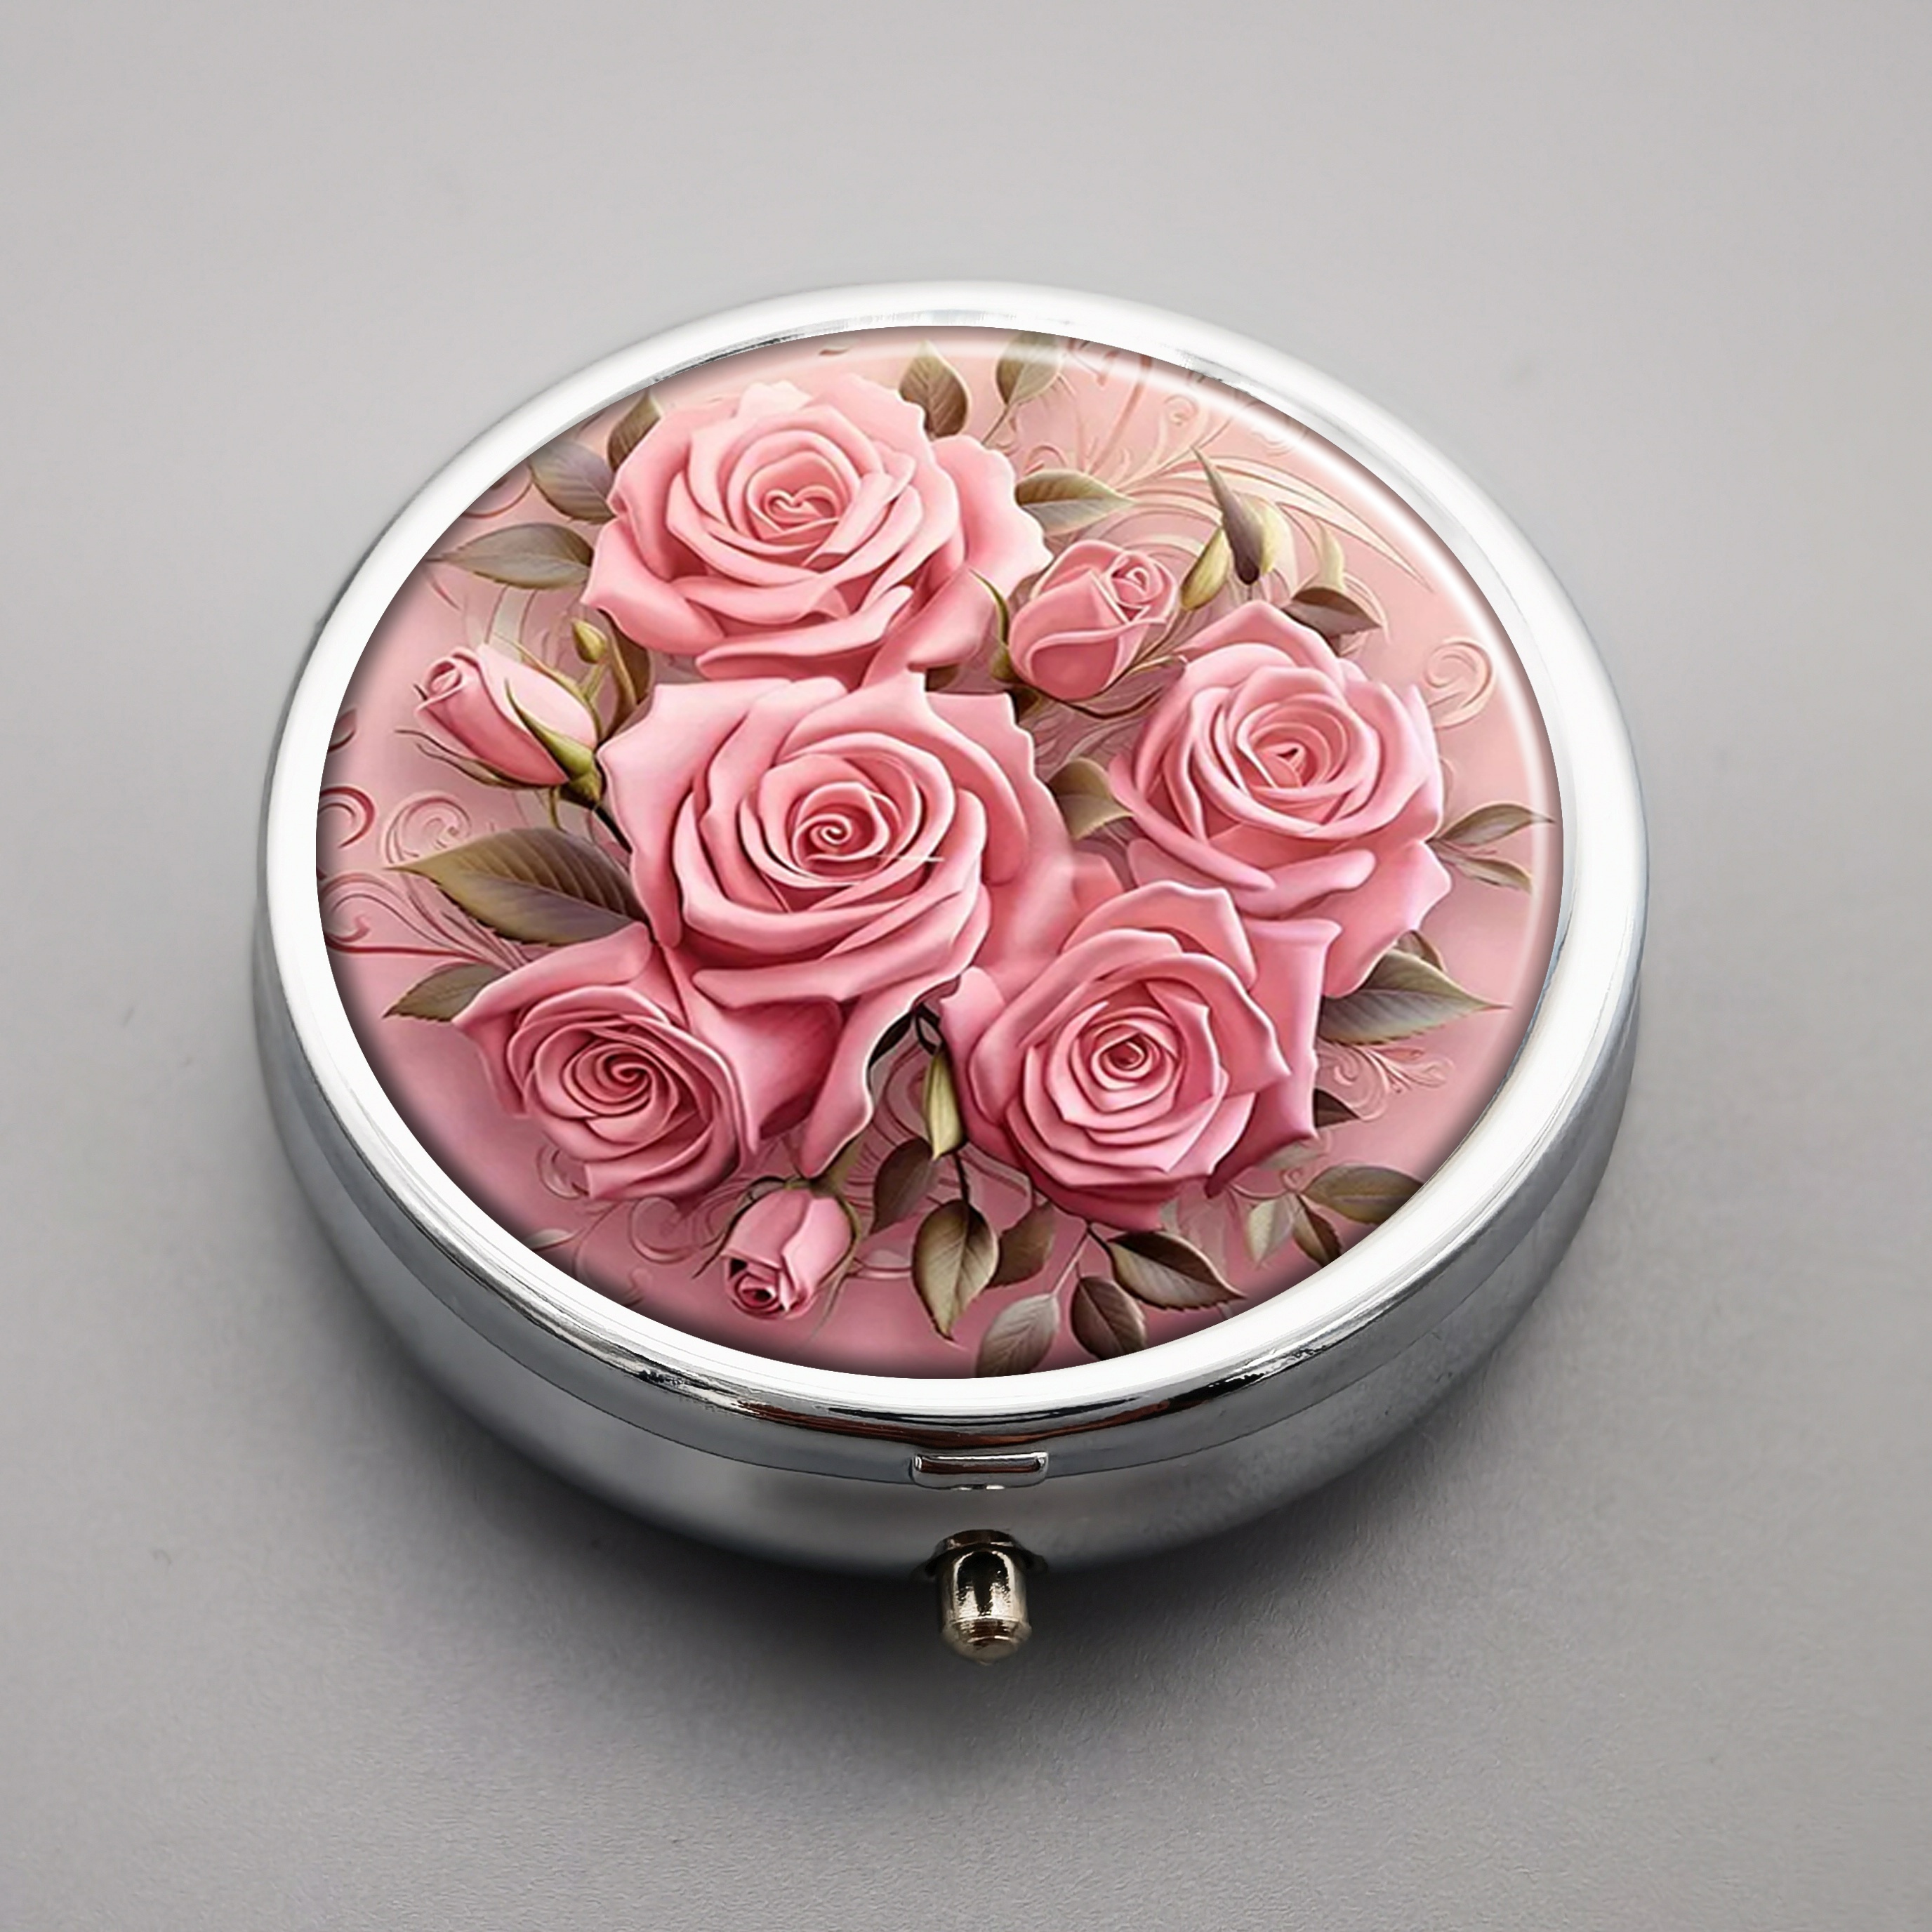 

1pc Round 3-compartment Pill Box, Pink Roses Design, 1.88-inch Diameter Metal Medicine Organizer, Portable For Pocket Or Purse, Decorative Vitamin Case, Ideal Gift For Valentine's Day